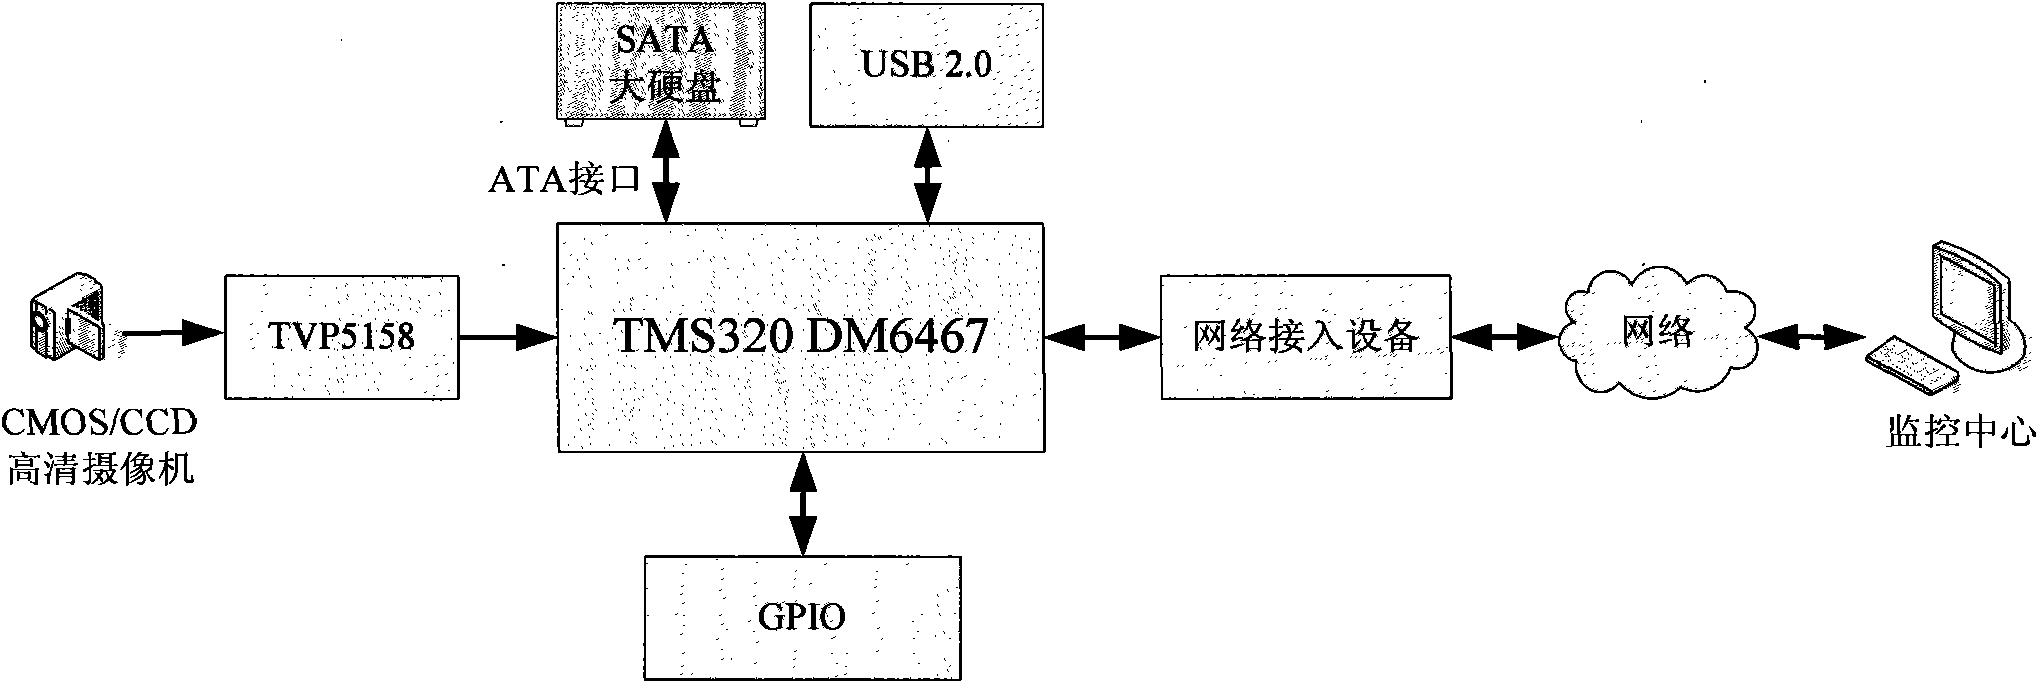 Network video monitoring system based on resolution ratio grading transmission